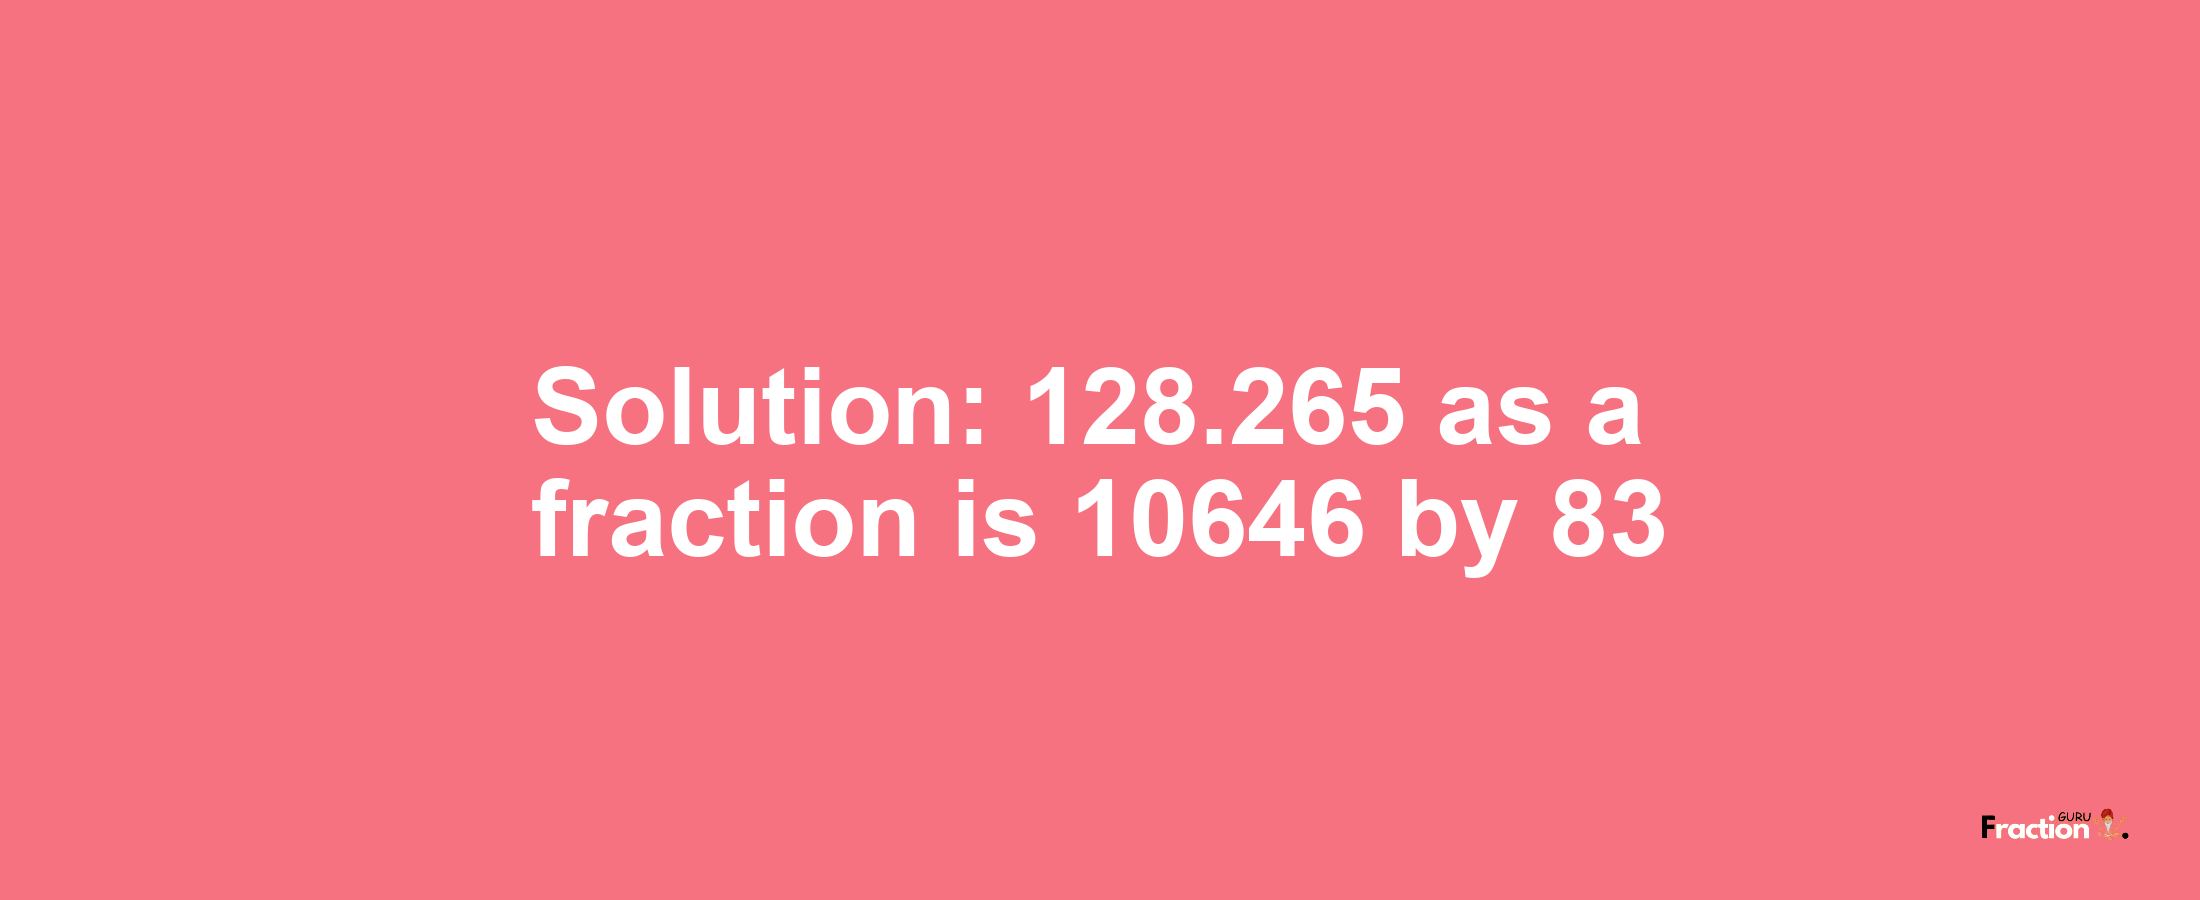 Solution:128.265 as a fraction is 10646/83